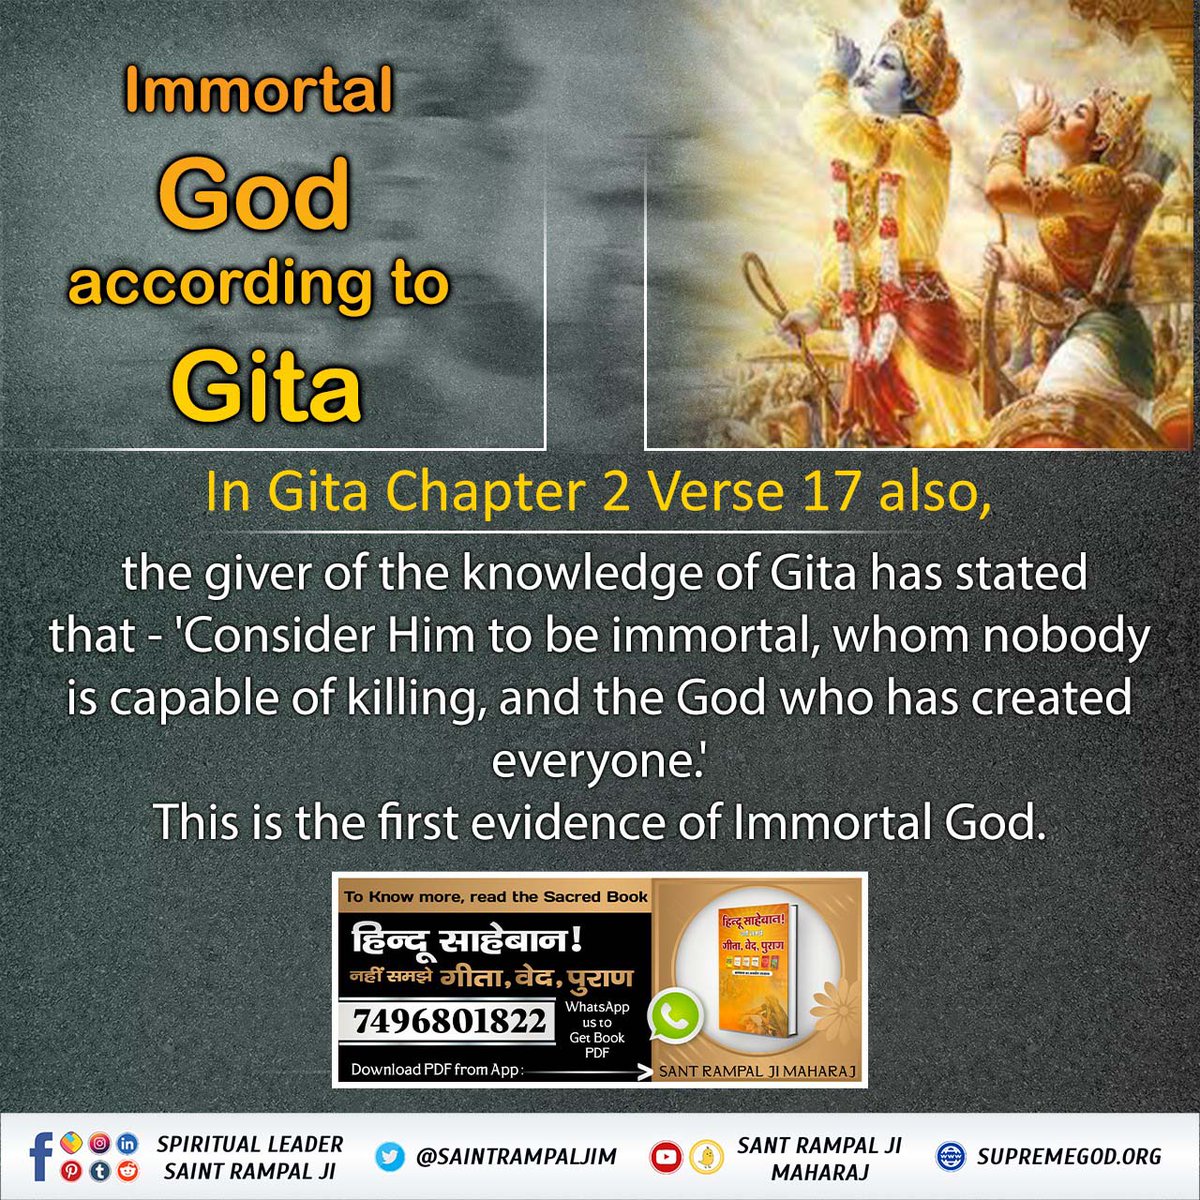 #गीता_प्रभुदत्त_ज्ञान_है 🪴🪴 In Gita Chapter 2 Verse 17 also, the giver of the knowledge of Gita has stated that - 'Consider Him to be immortal, whom nobody is capable of killing, and the God who has created everyone! This is the first evidence of Immortal God.